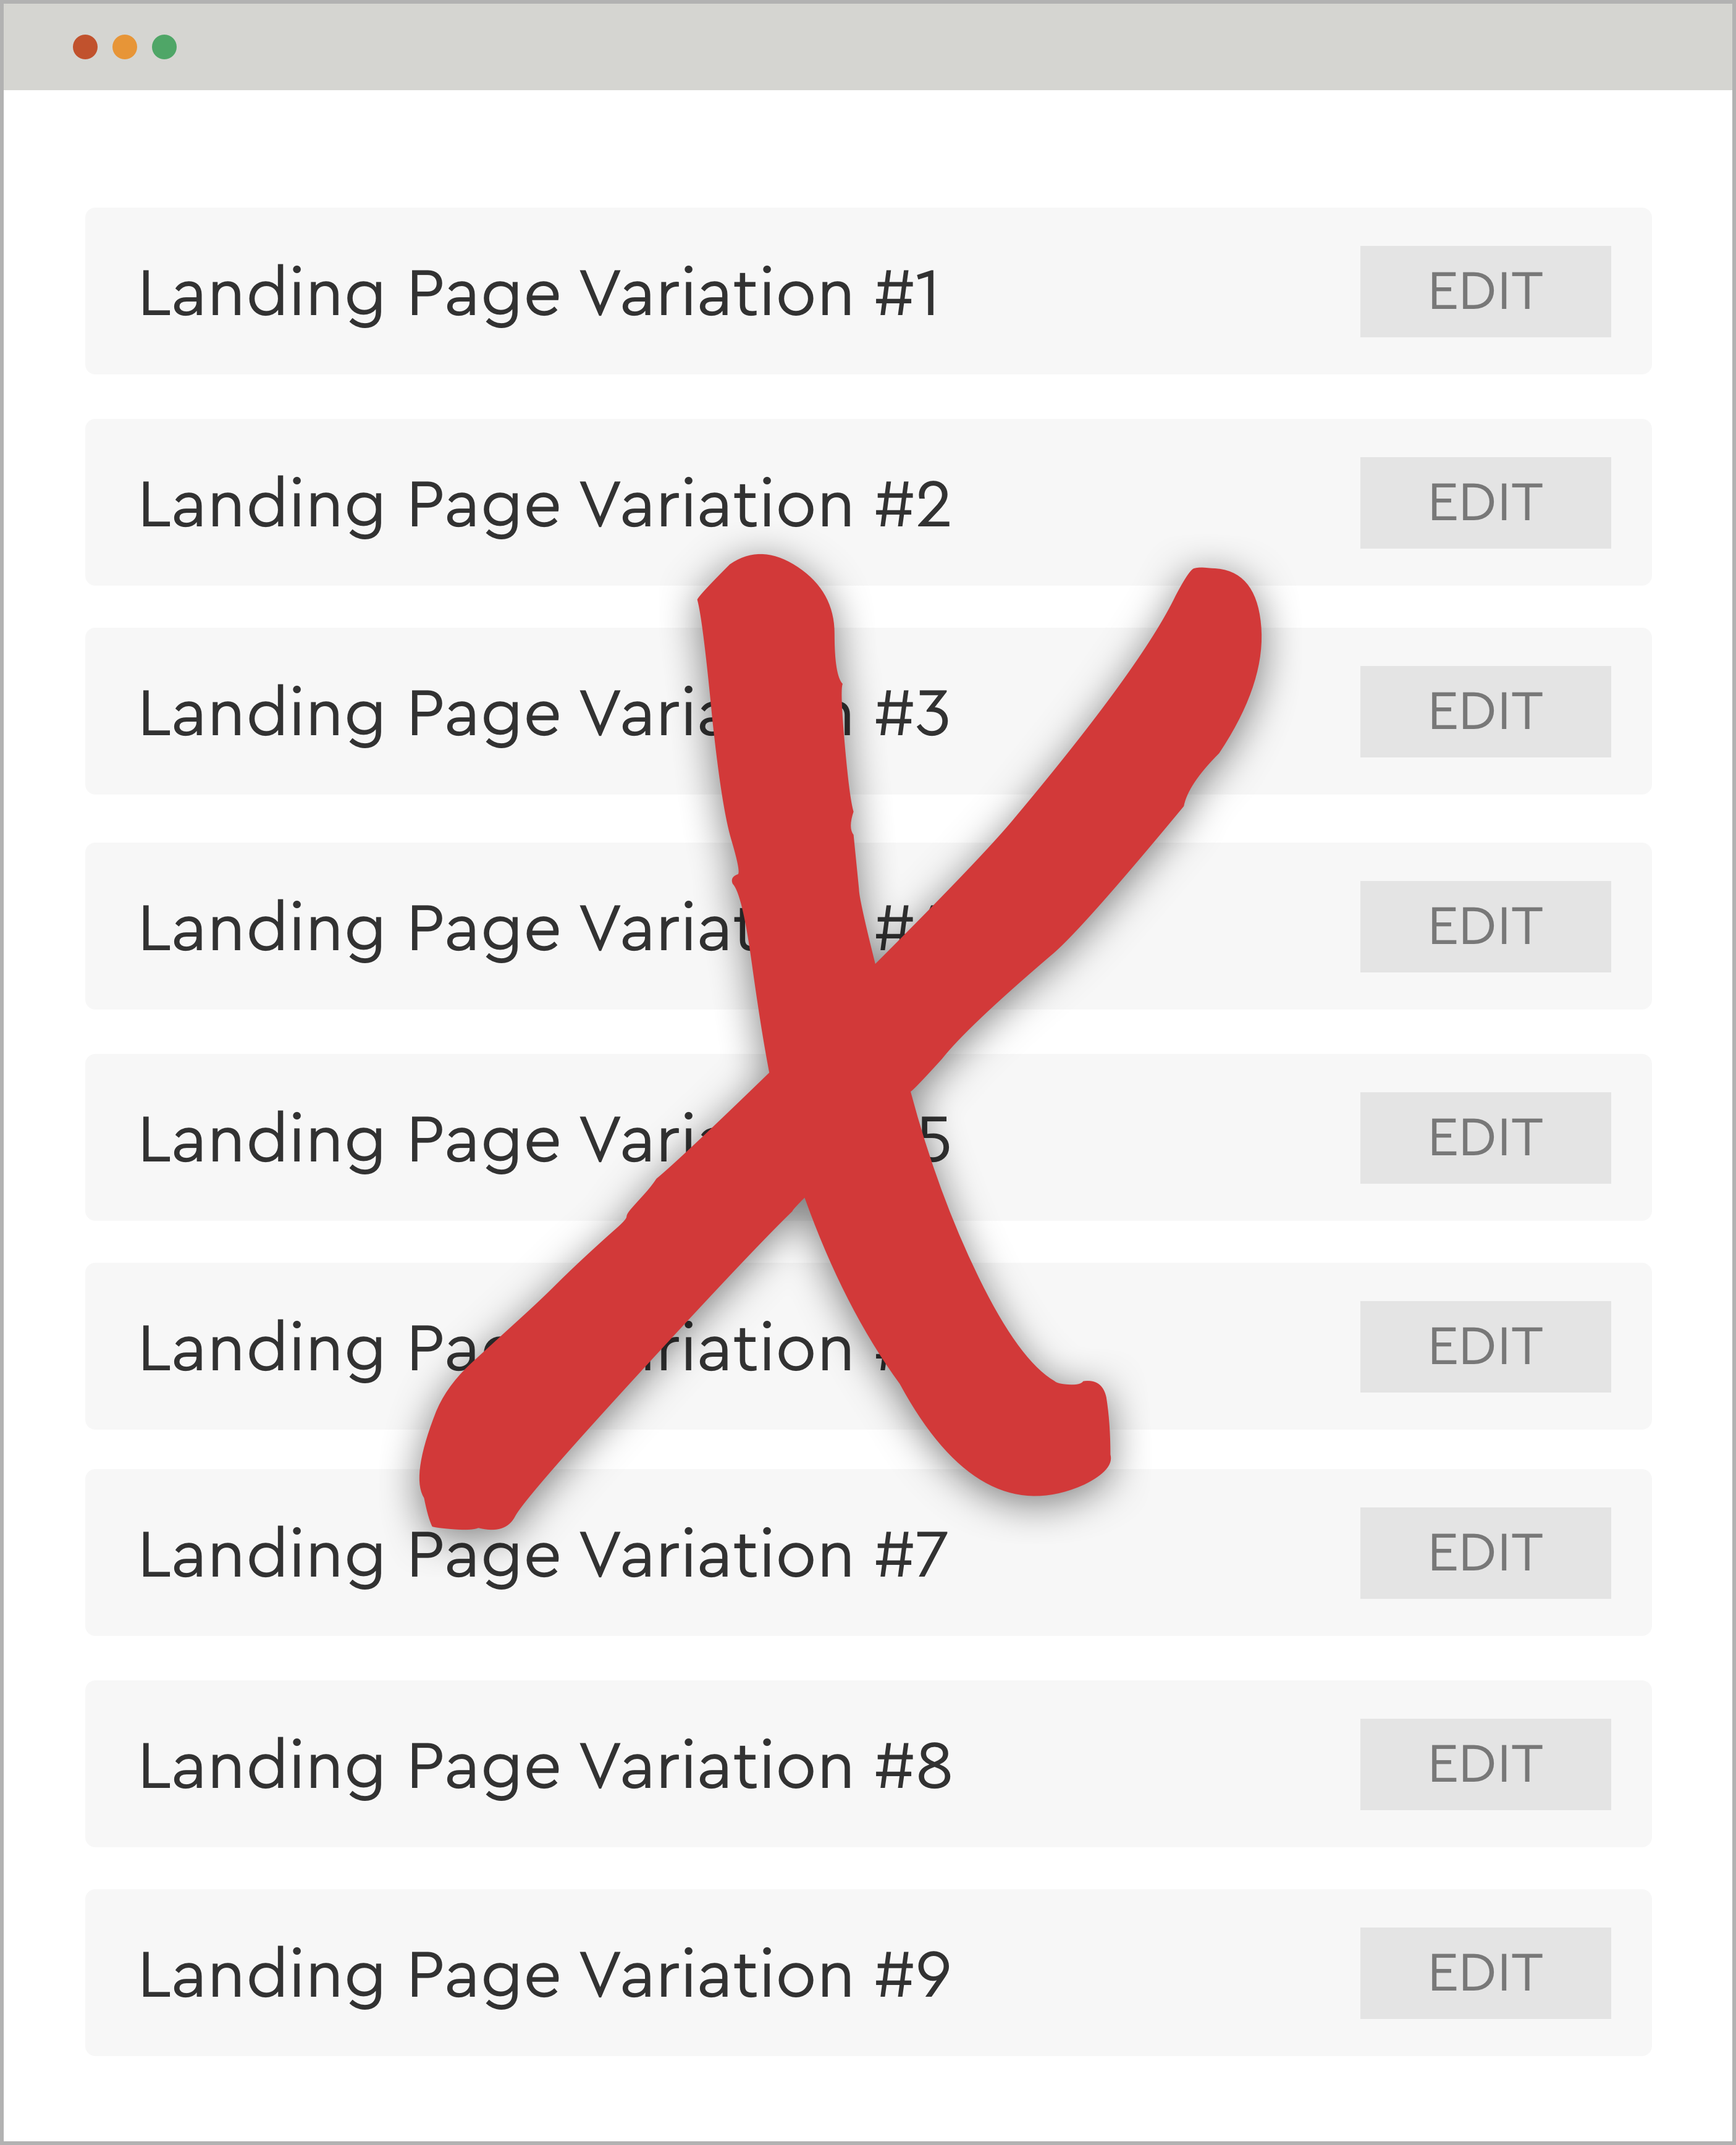 One landing page is all you need